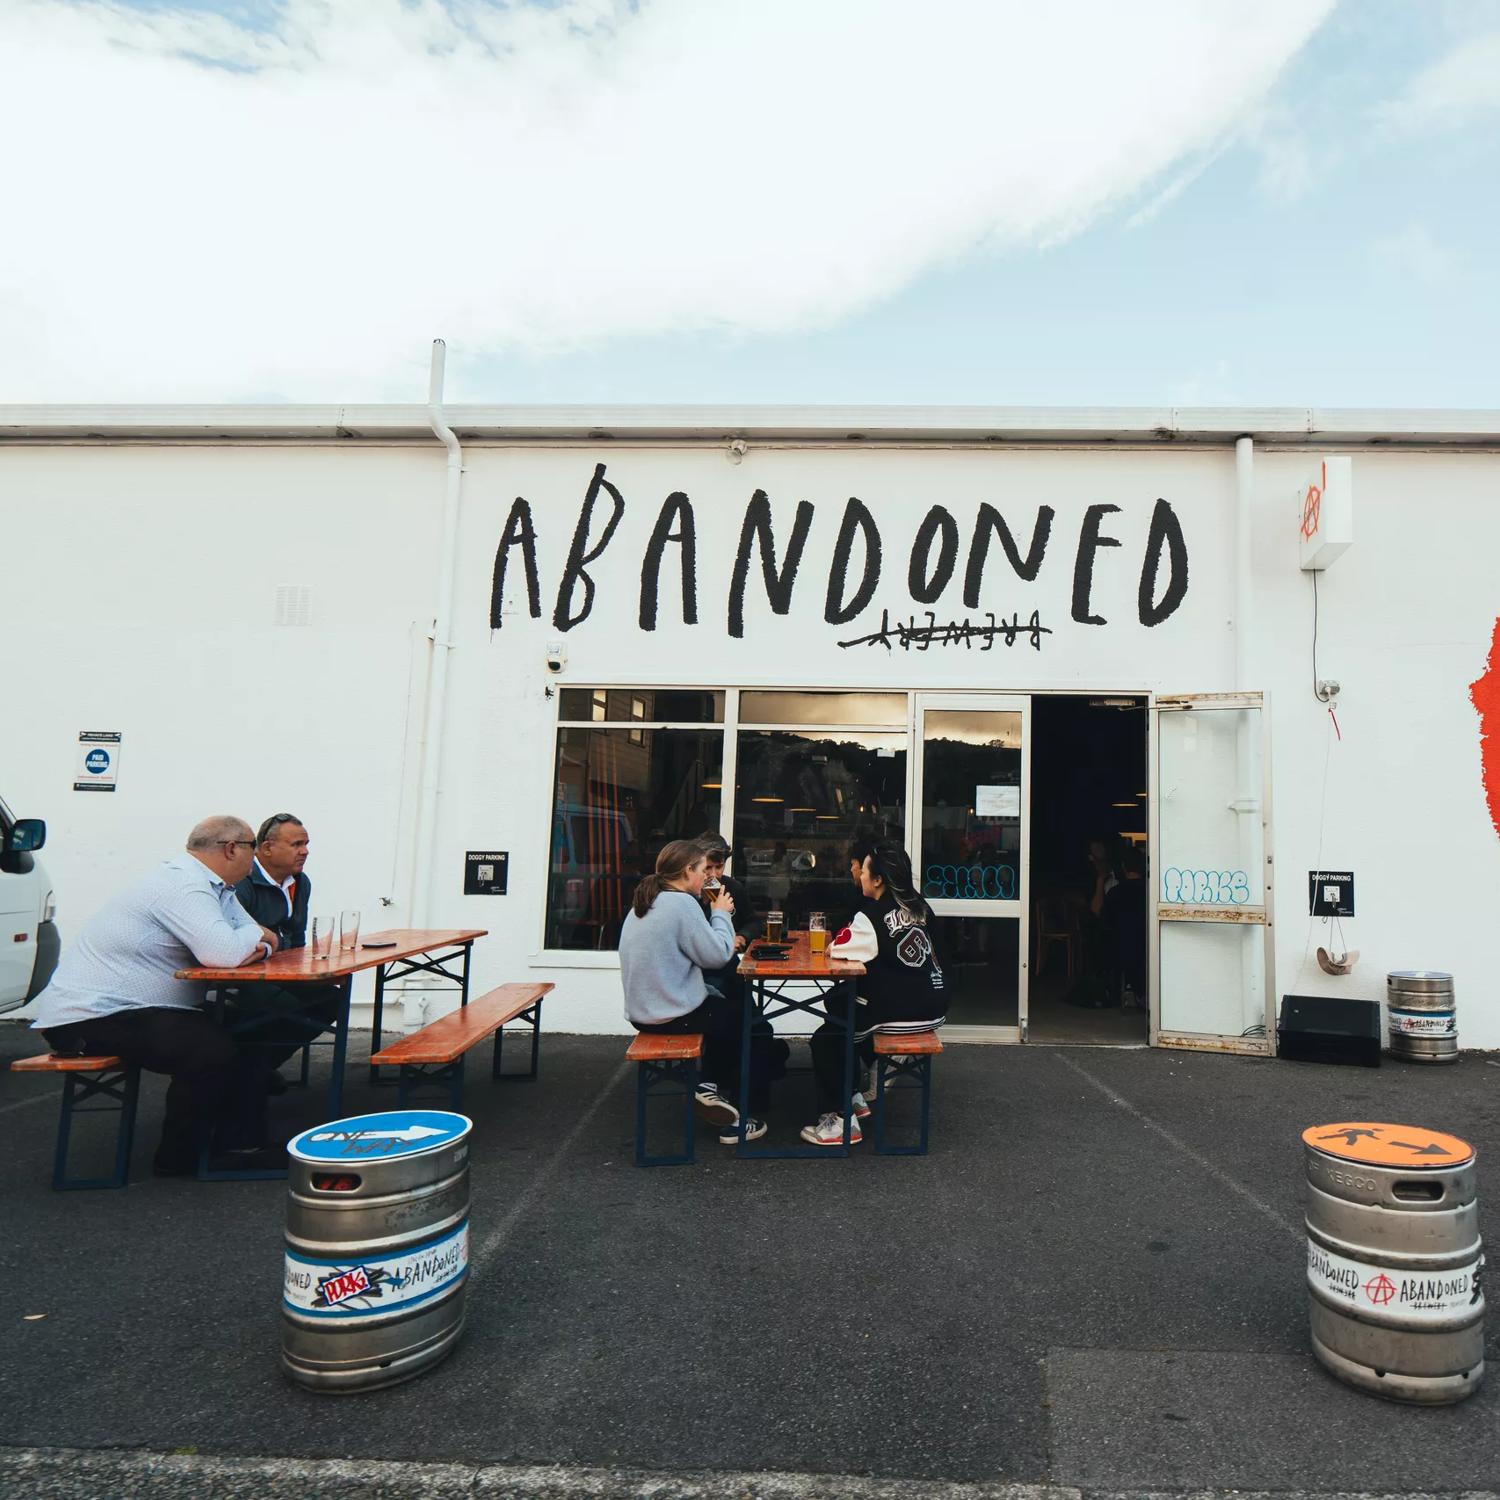 The exterior of Abandoned Taproom in Petone. It is a large white building with a large 'Abandoned' sign above the door, and the red logo on the wall. People sit in front on benches.